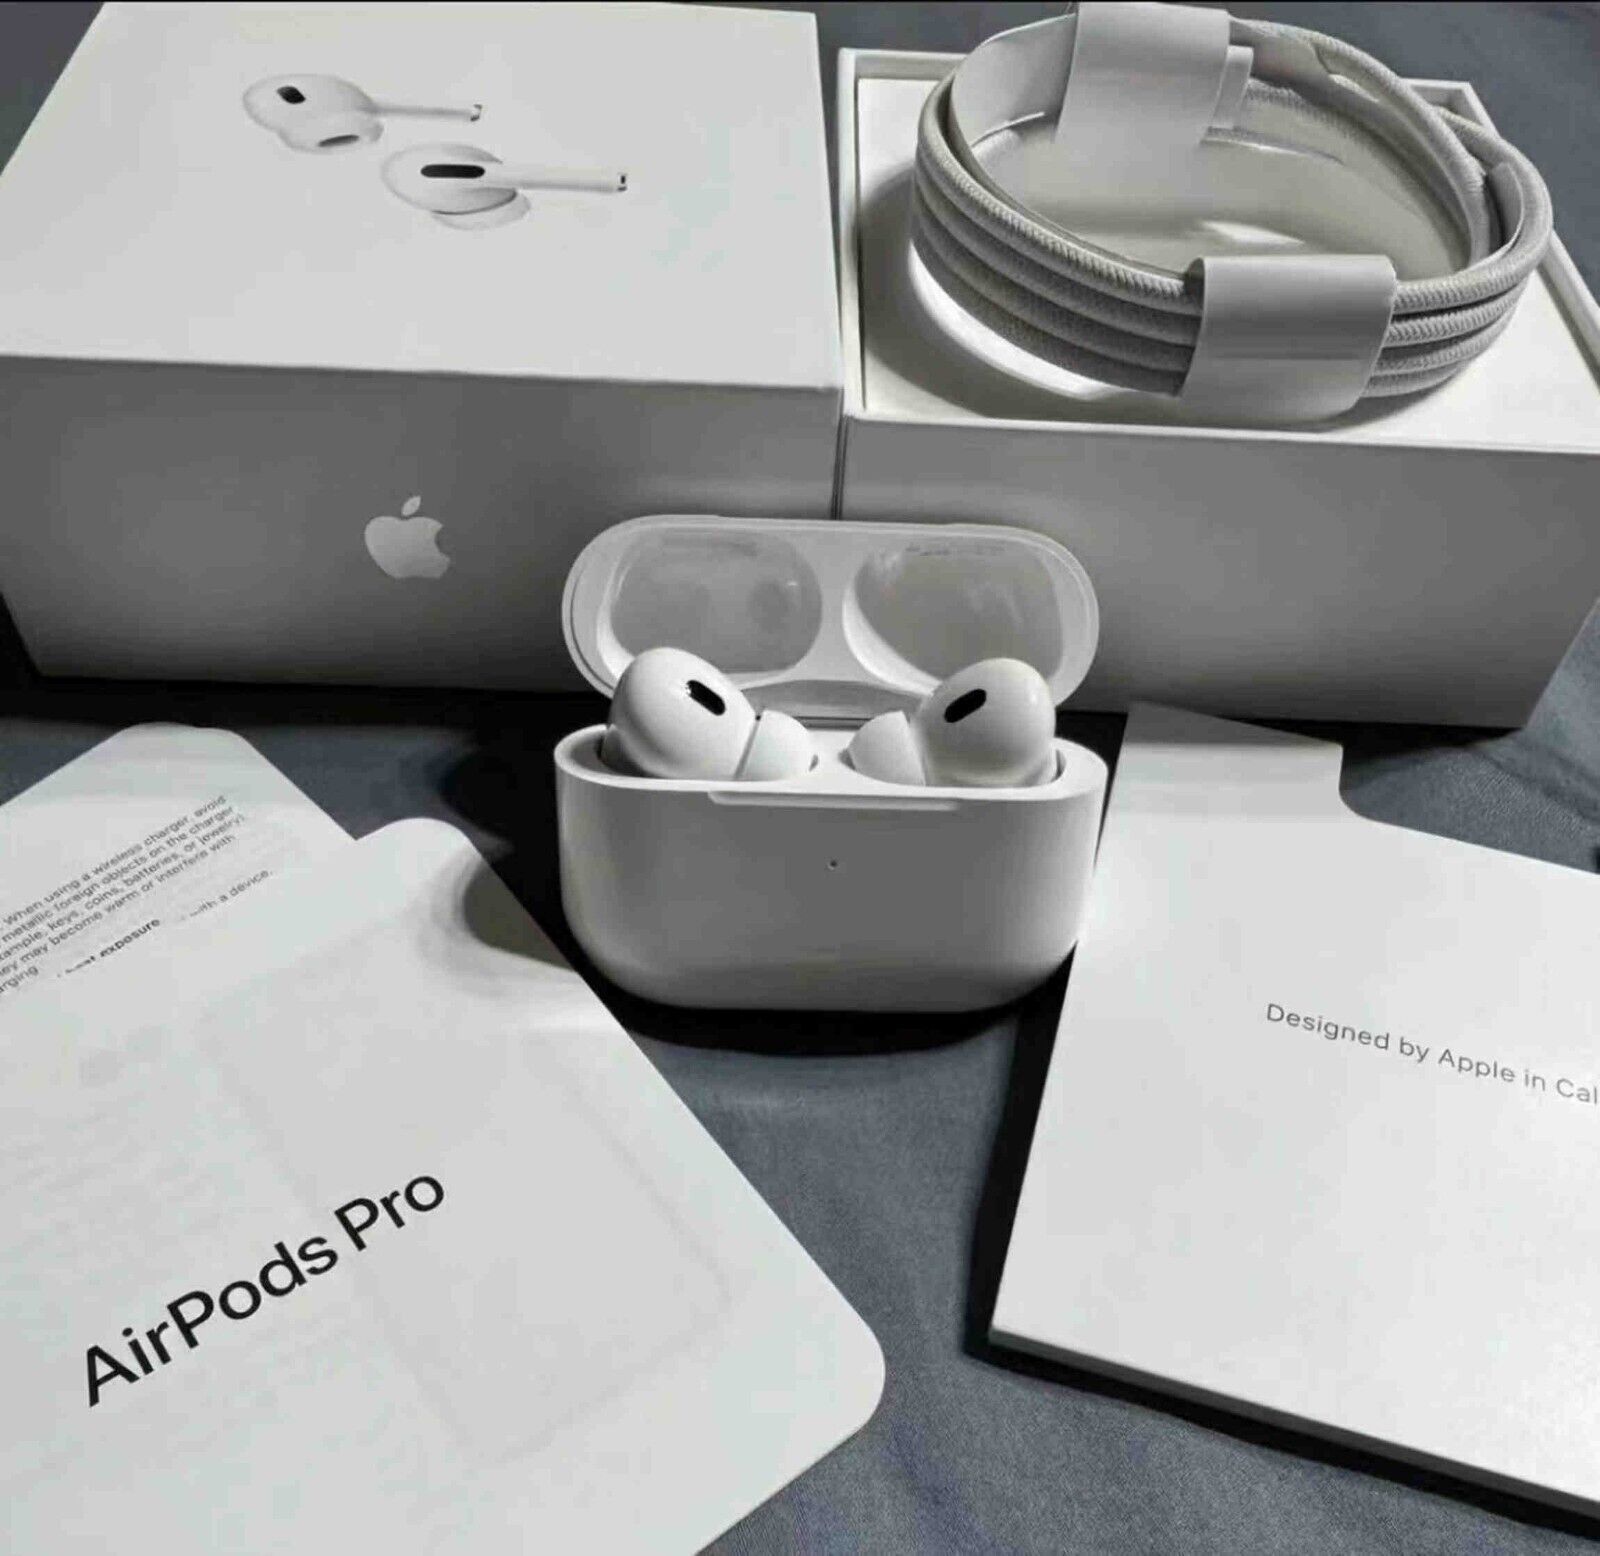 AppIe AirPods Pro (2nd Generation) Earphone Wireless with Charging Case -US Ship